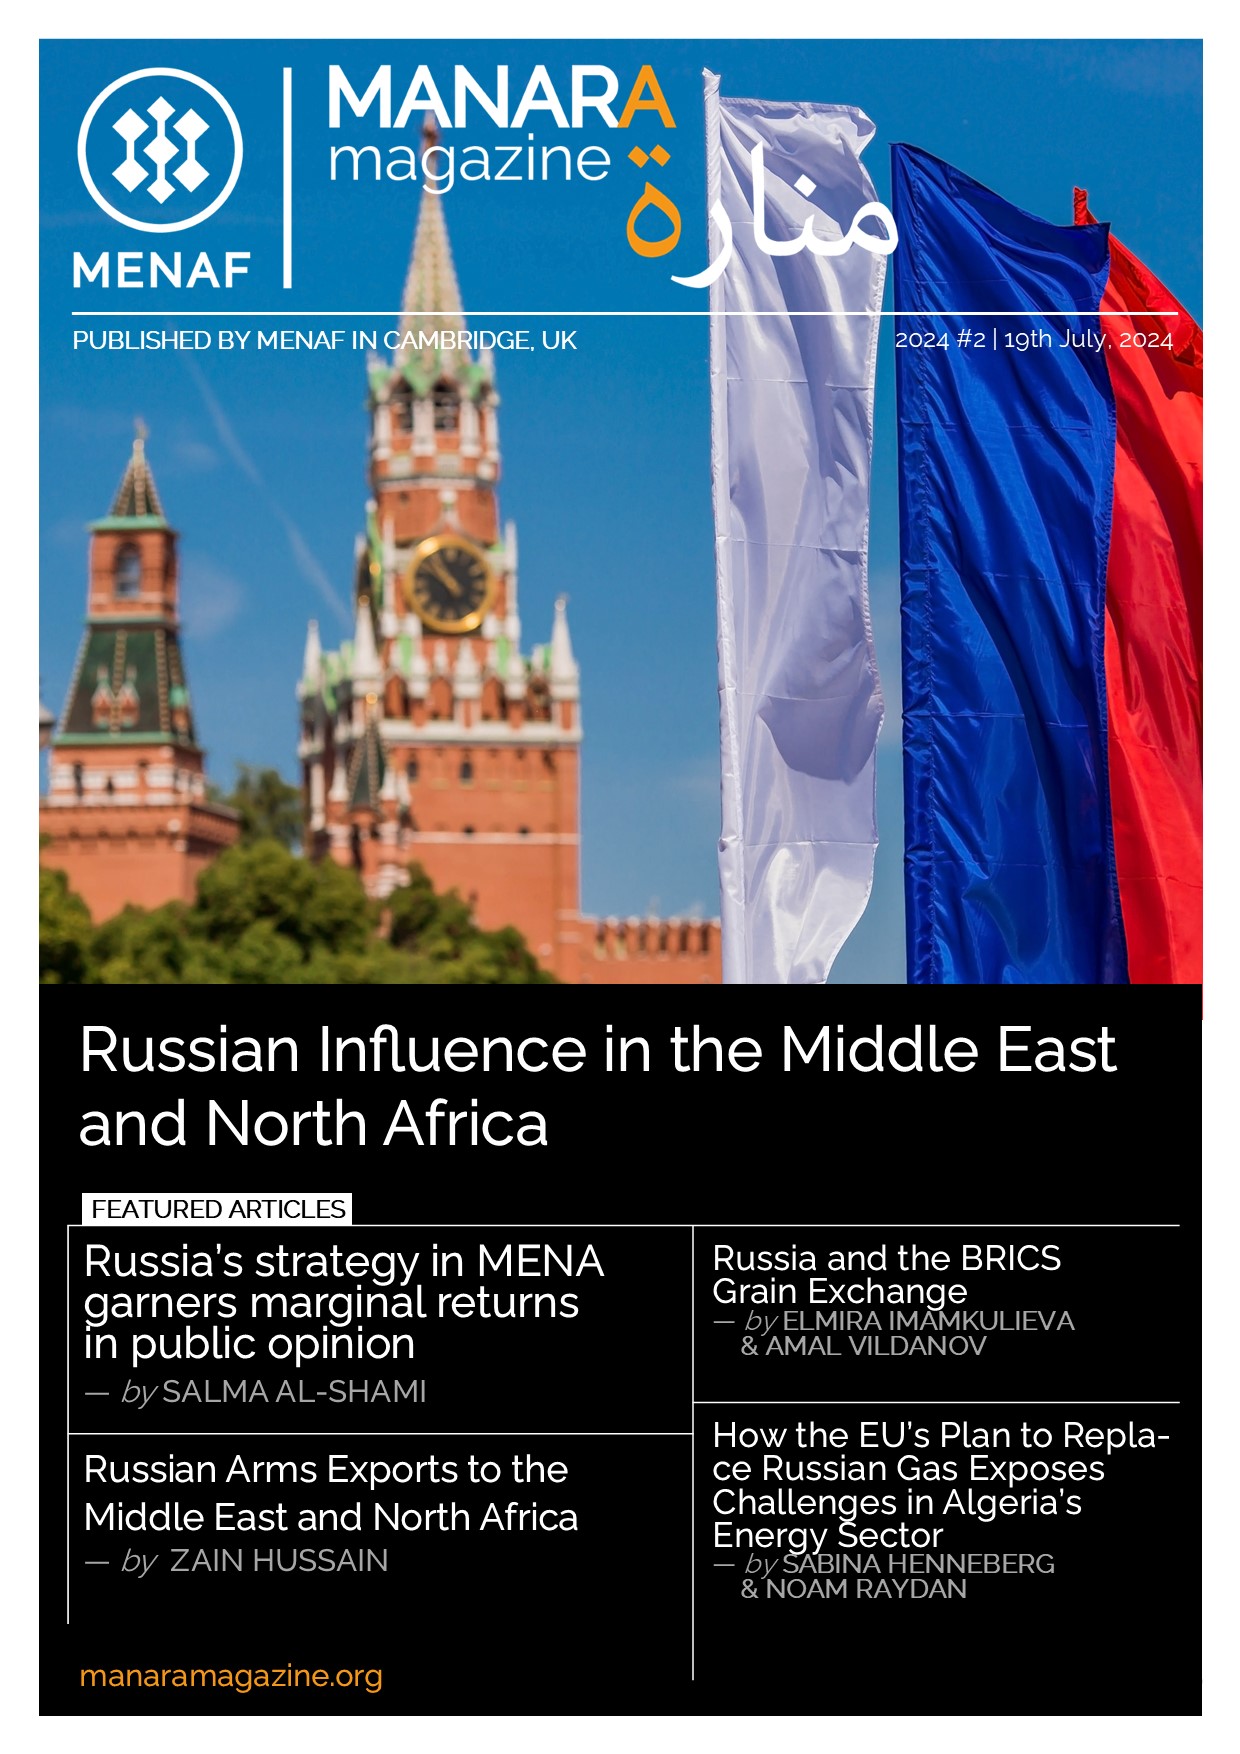 Print Issue_2024.2 - Russian Influence in the Middle East and North Africa